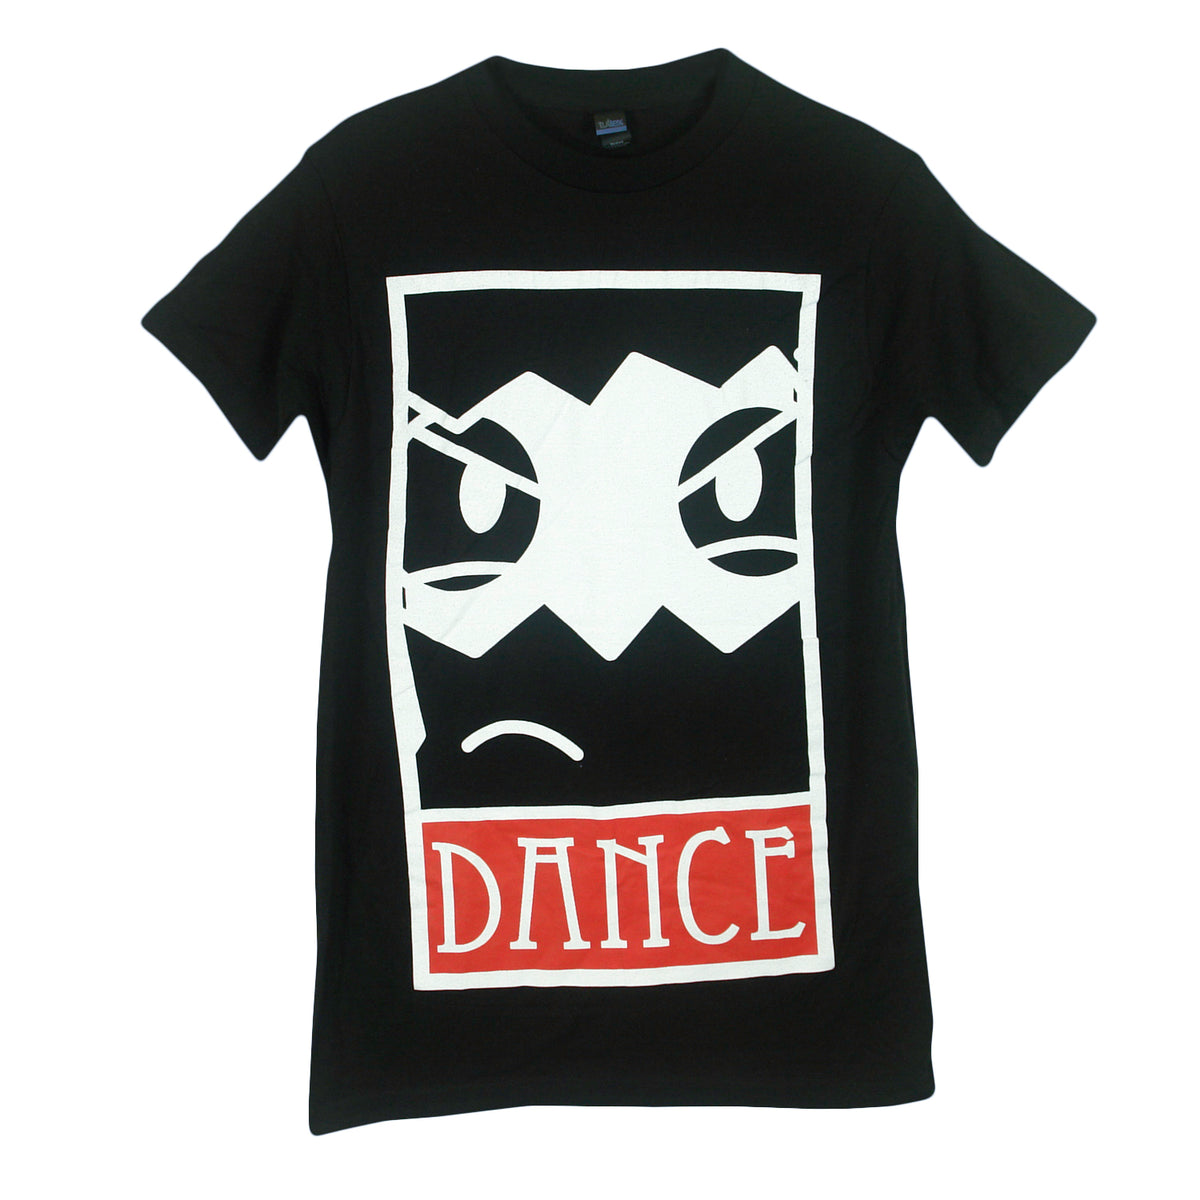 image of a black tee shirt on a white background. tee has full body print of a white rectangle. inside the rectangle is a robot face, at the bottom says dance